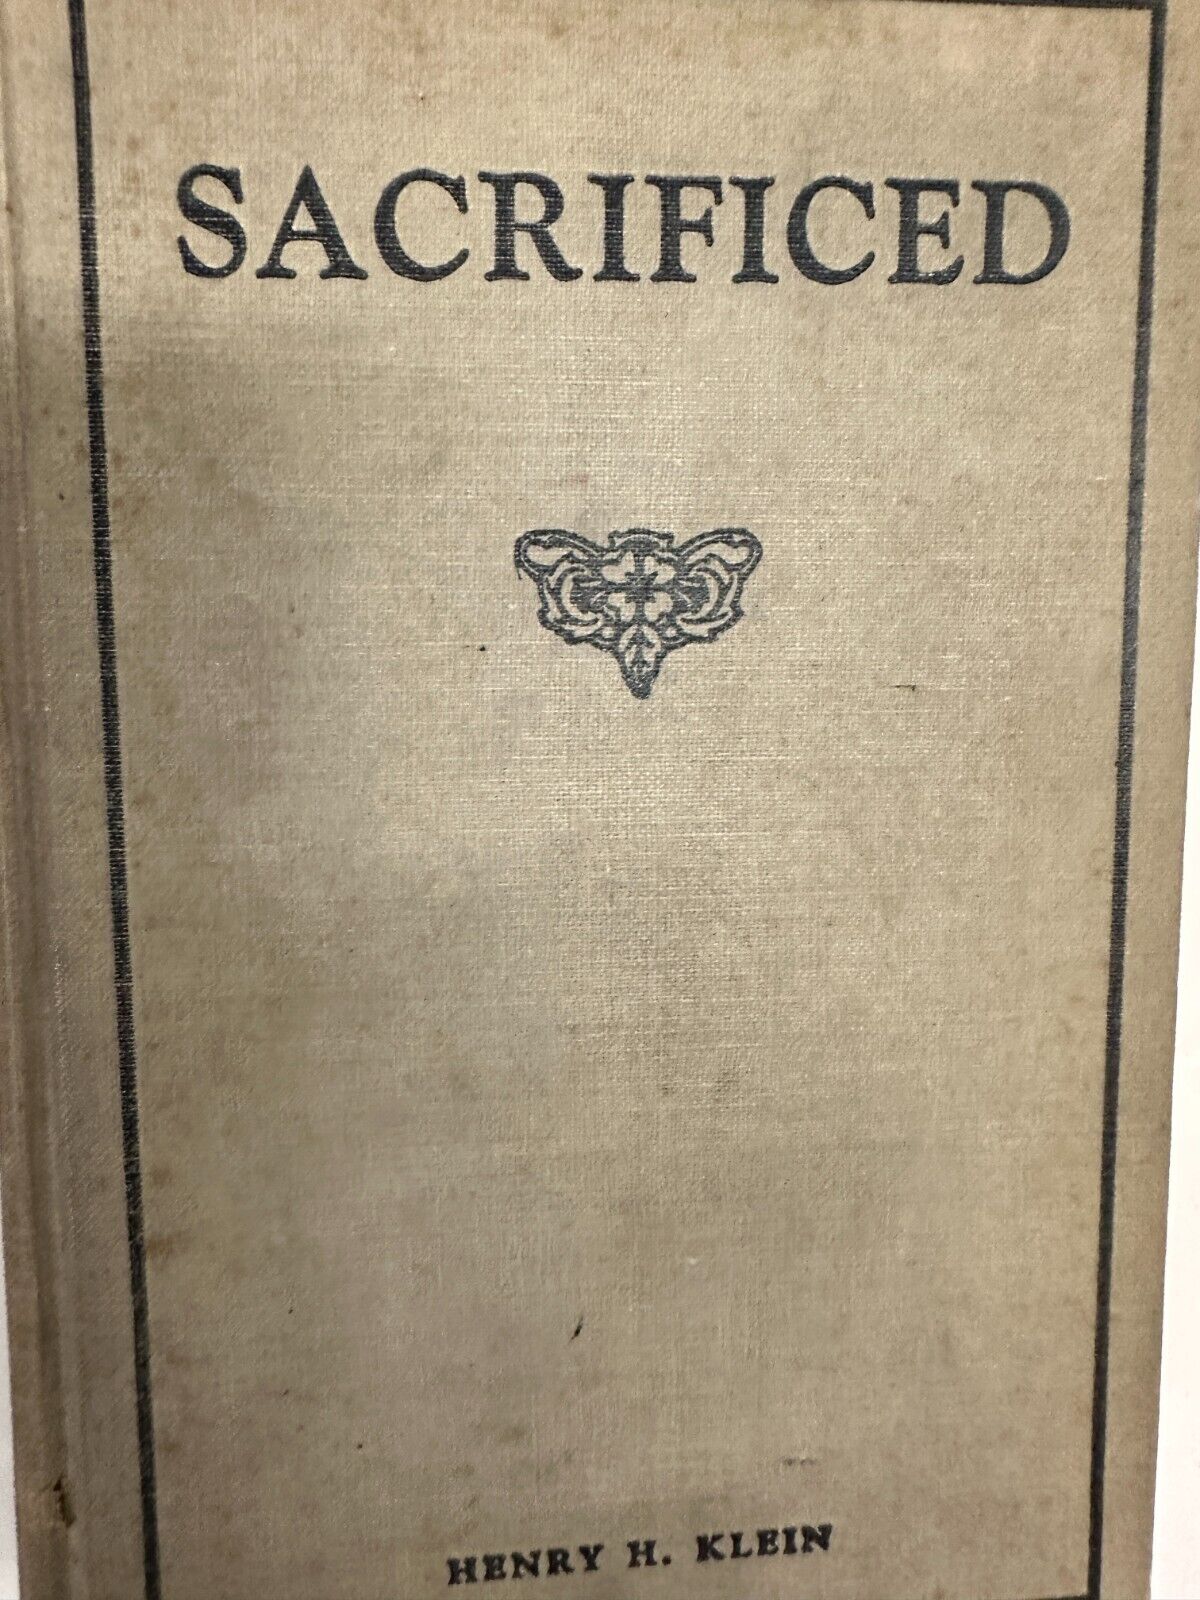 Sacrificed The Story Lieut. Charles Becker Inscribed by Henry H. Klein 1927 1st